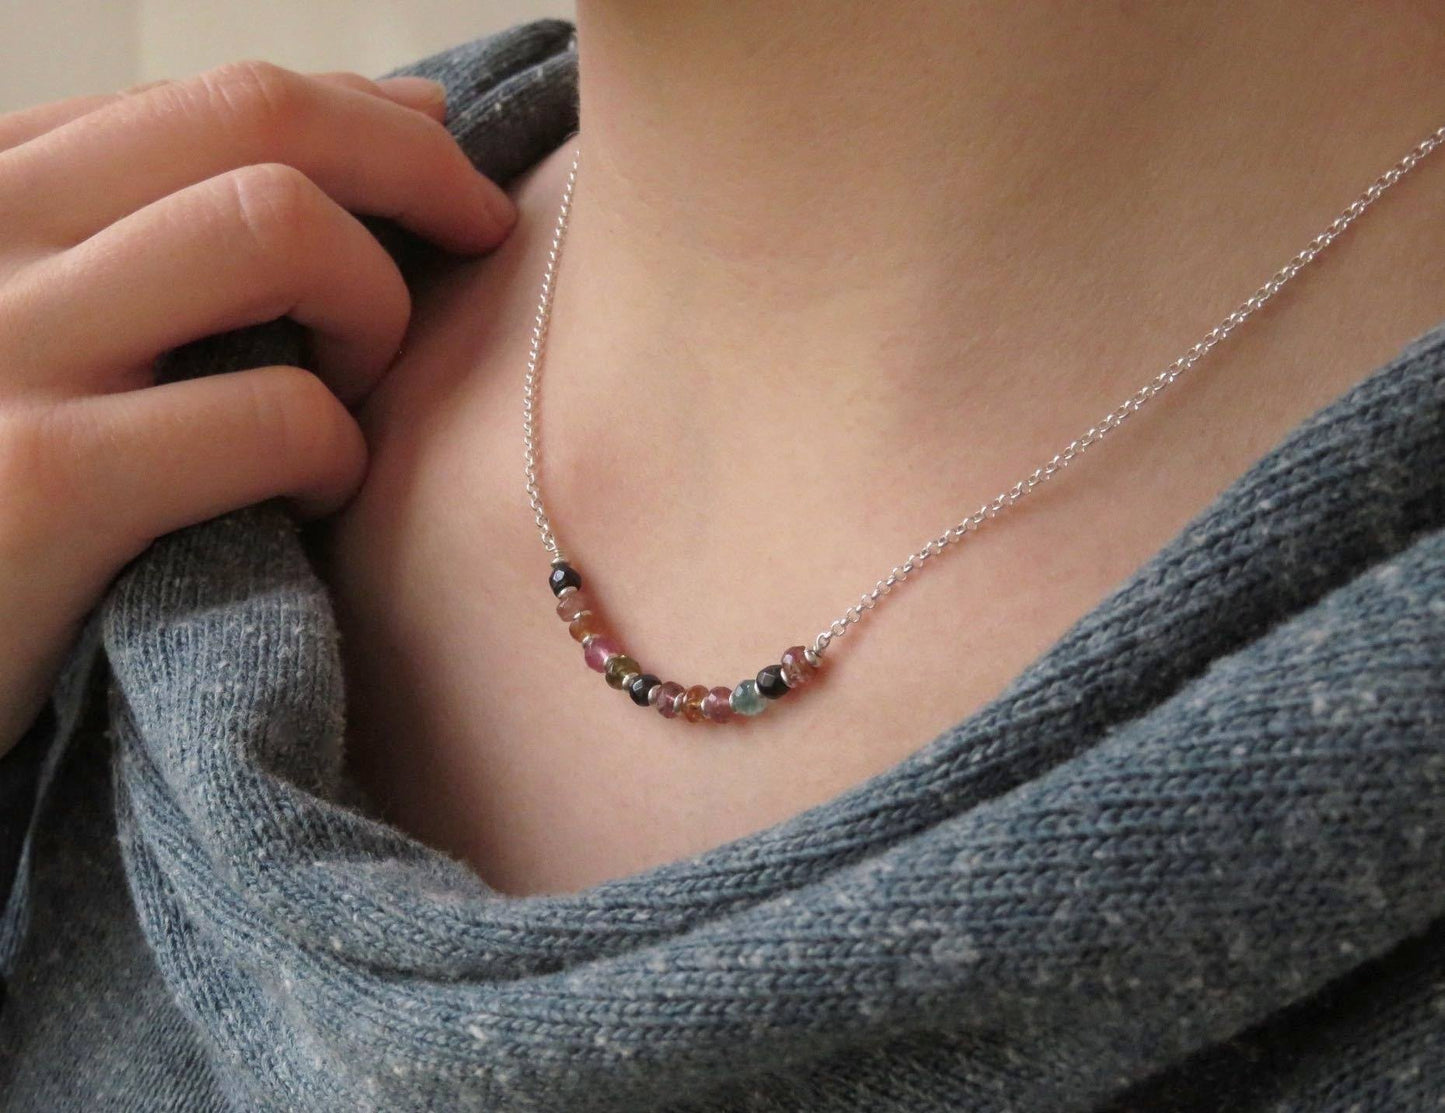 Necklace with small tourmaline stones made of silver 